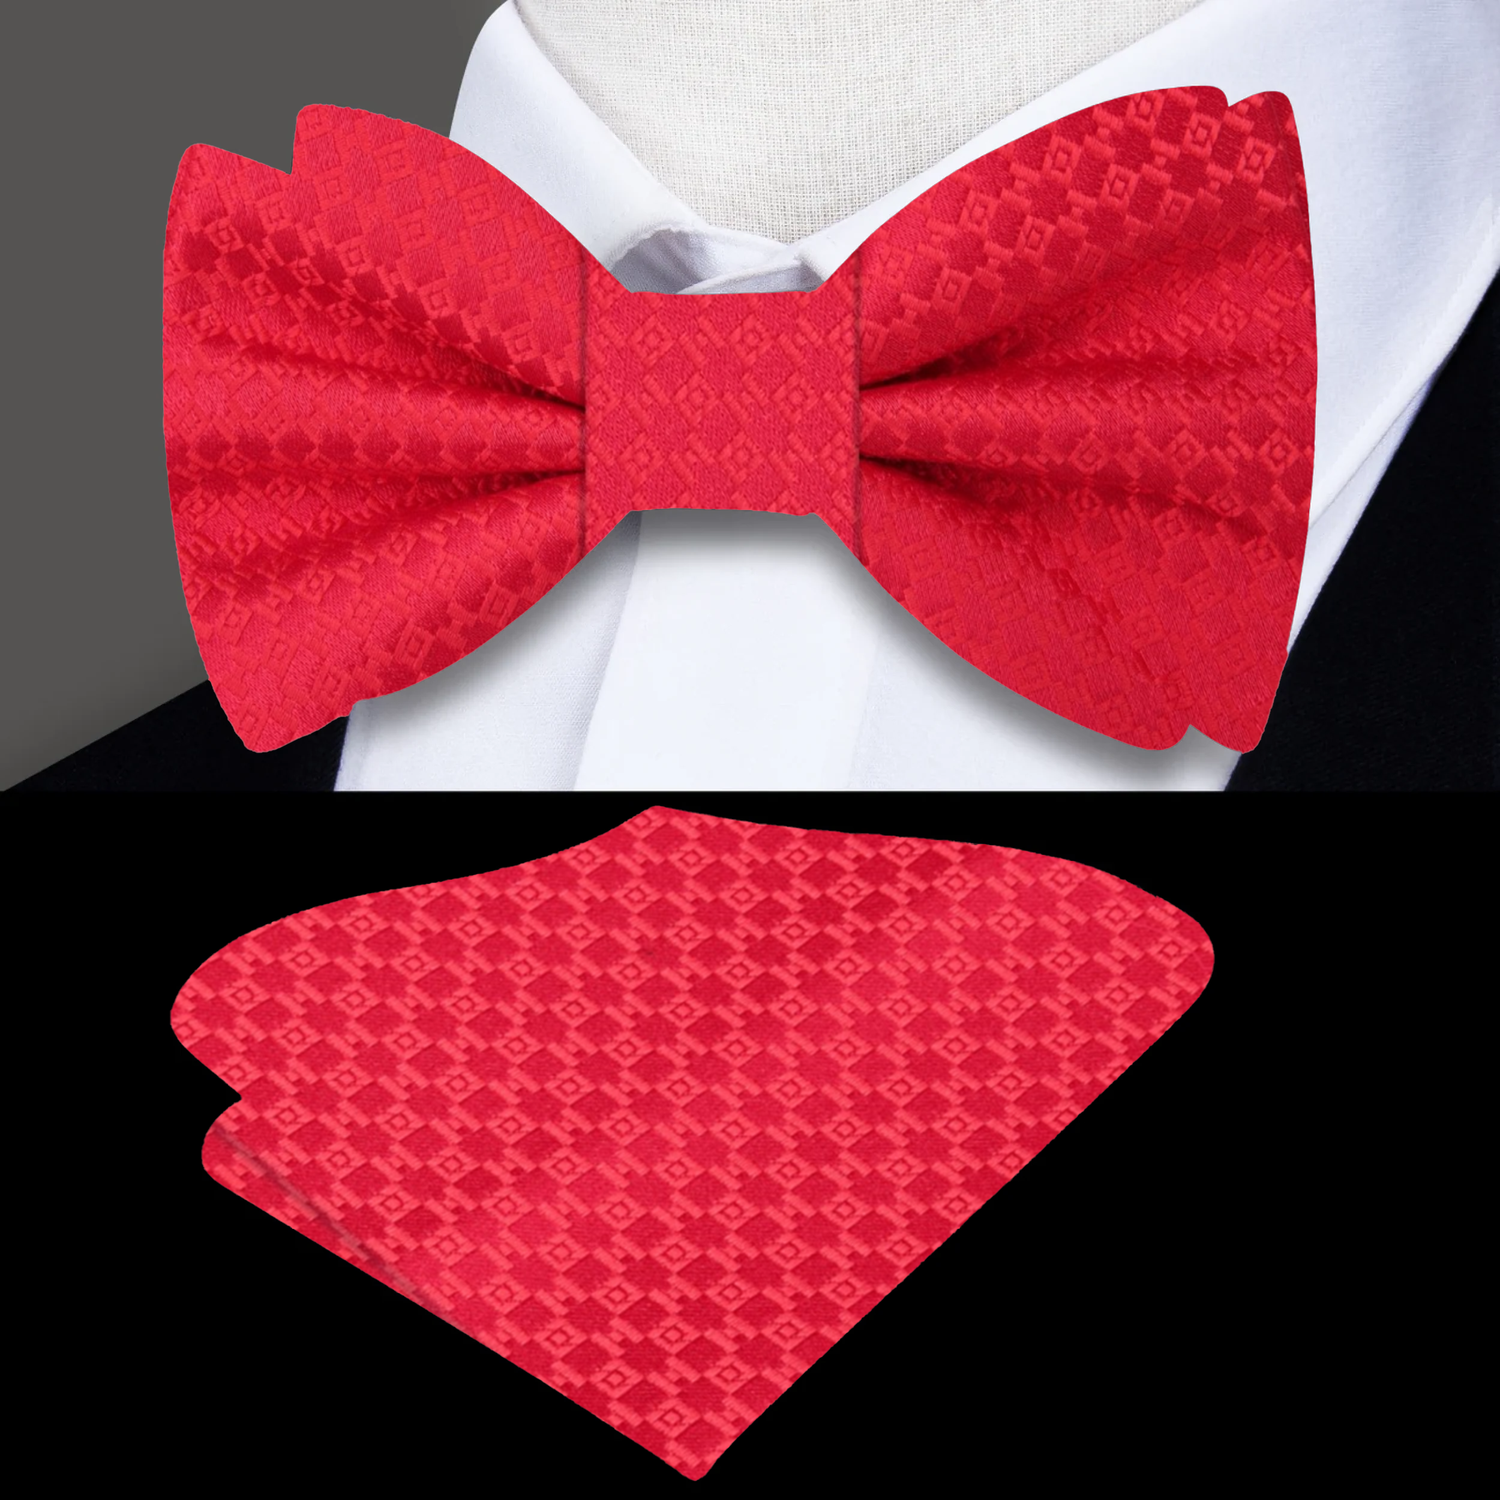 Red Geometric Bow Tie and Pocket Square